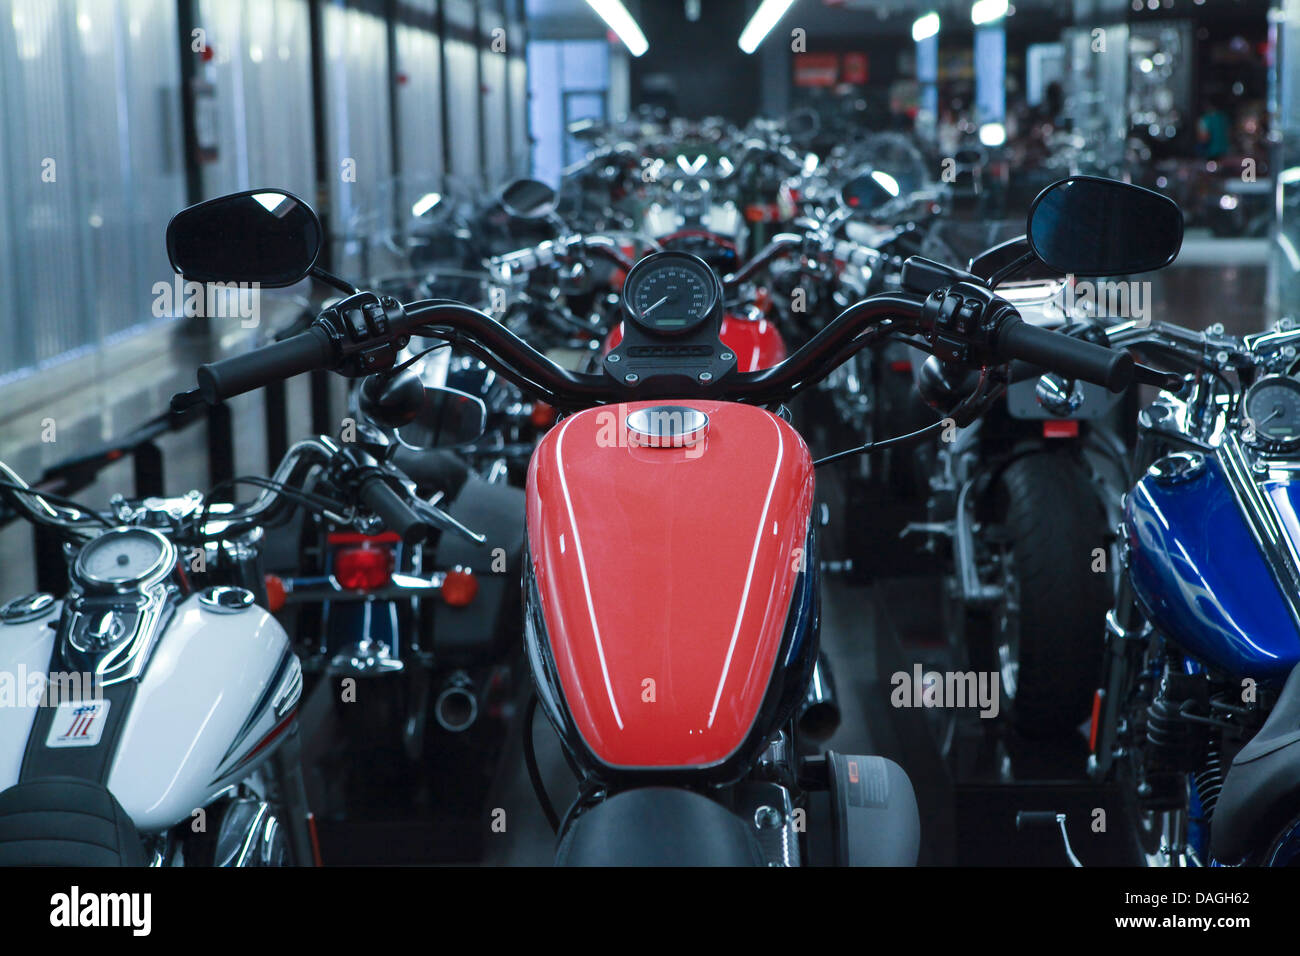 Harley-Davidson motorcycles are seen on display at the Harley-Davidson museum in Milwaukee Stock Photo